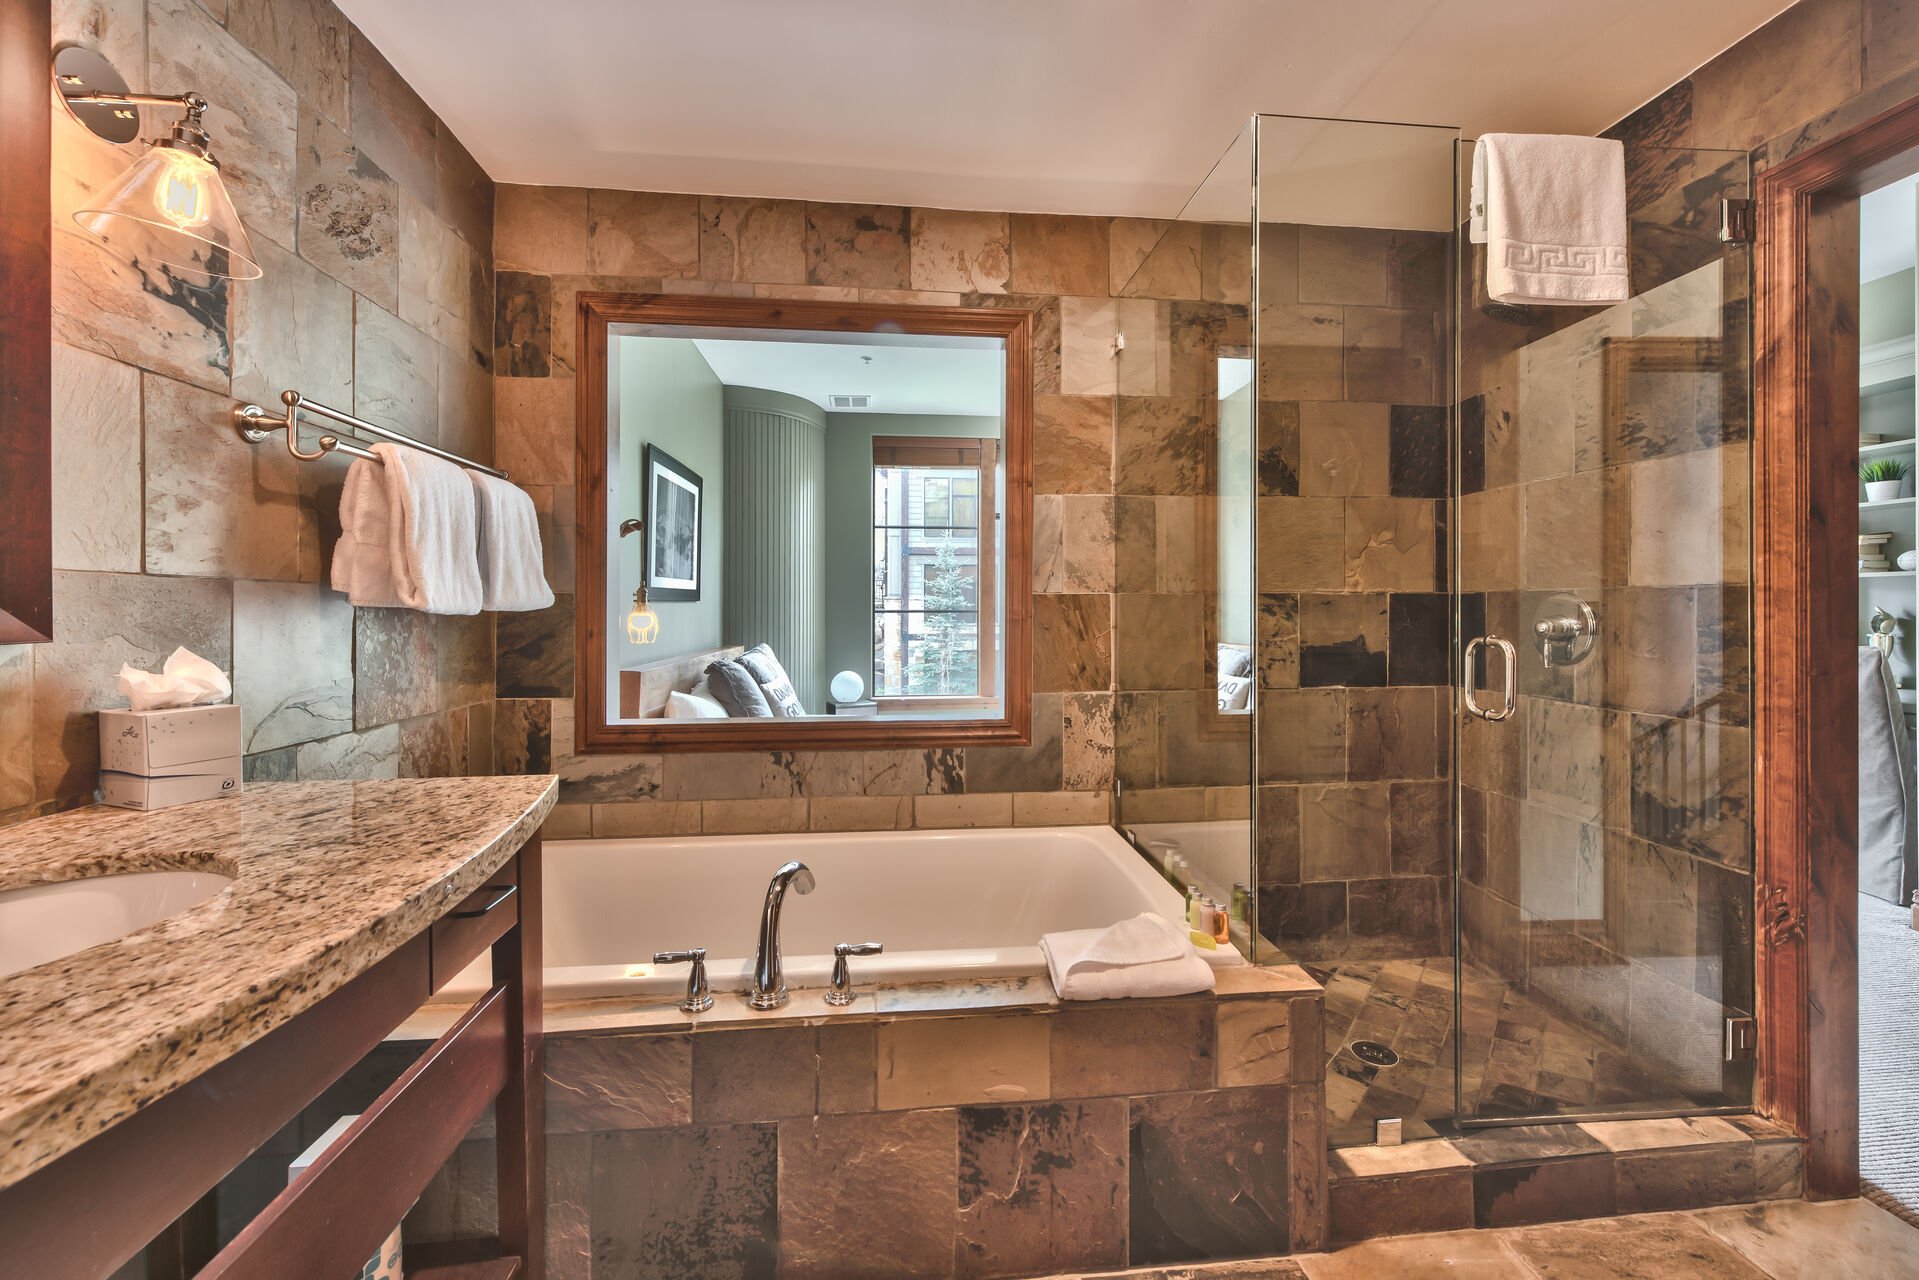 Master Bathroom 3 with a Granite Counter Vanity, a Stone Shower, and a Roman Soaking Tub